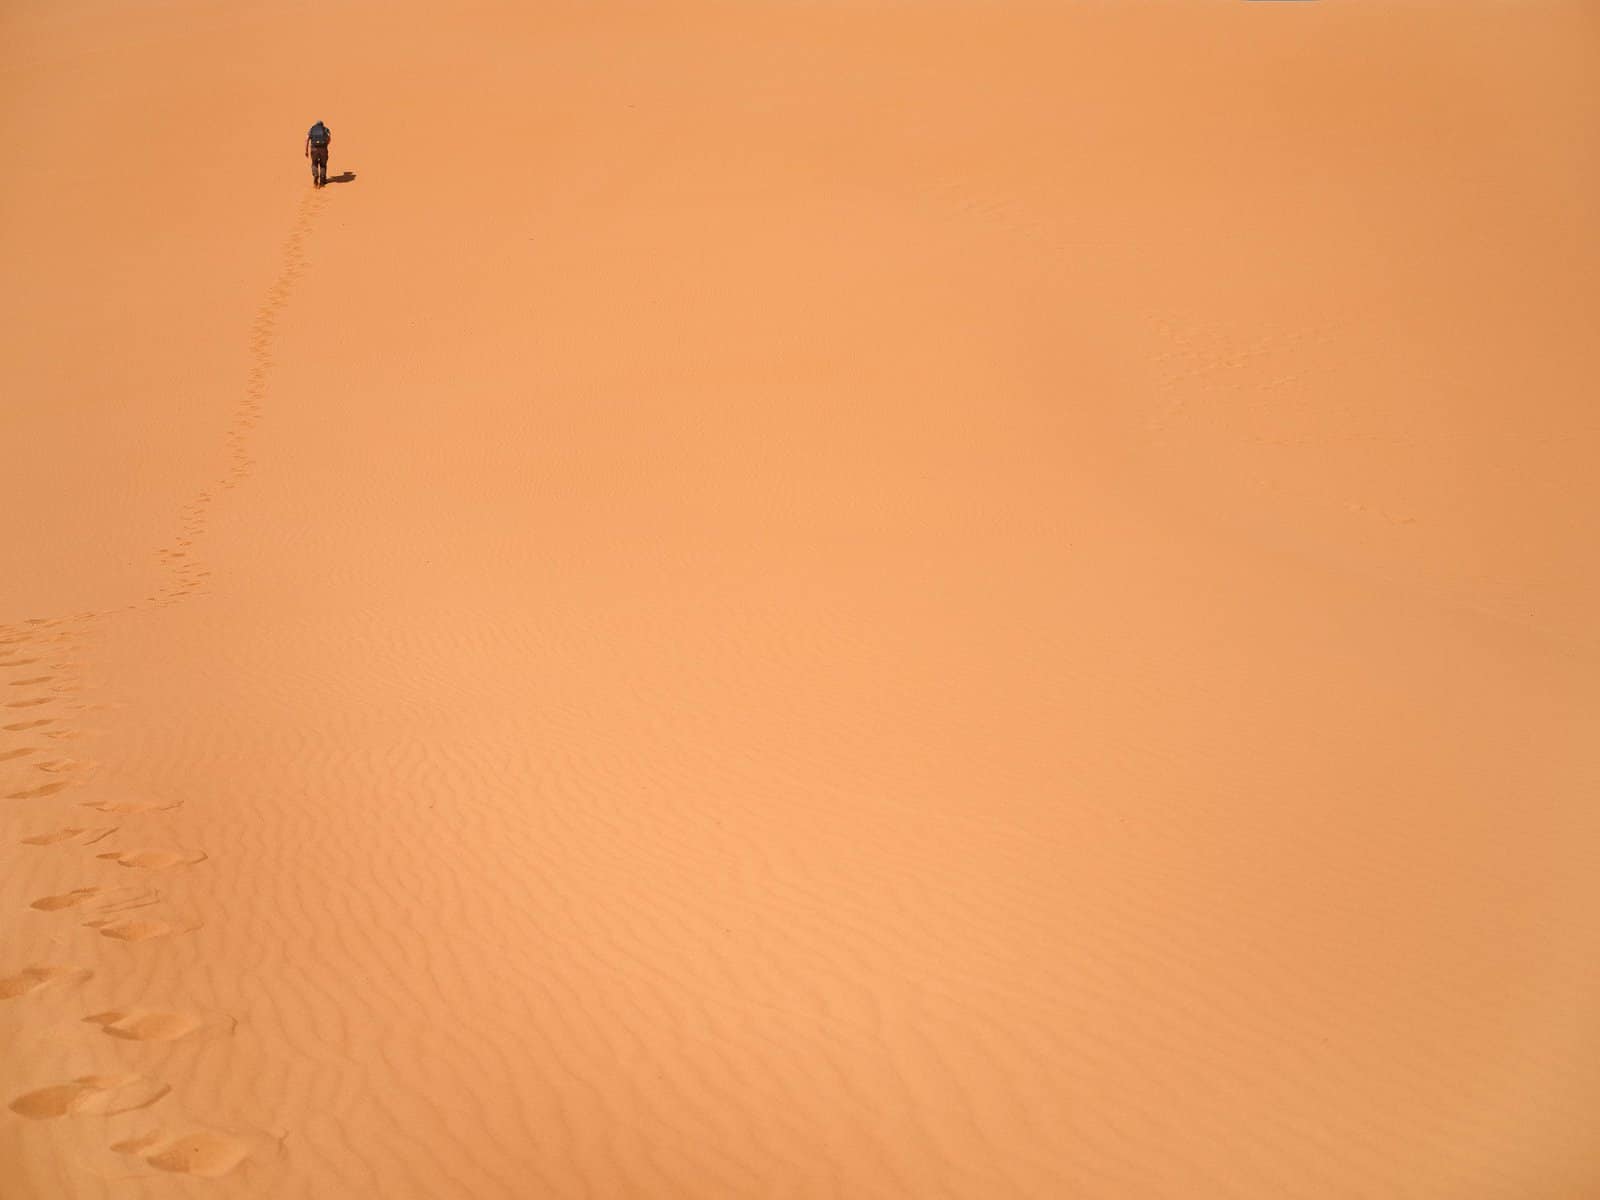 Orange desert very minimal. Person very small in frame walking to top of frame.